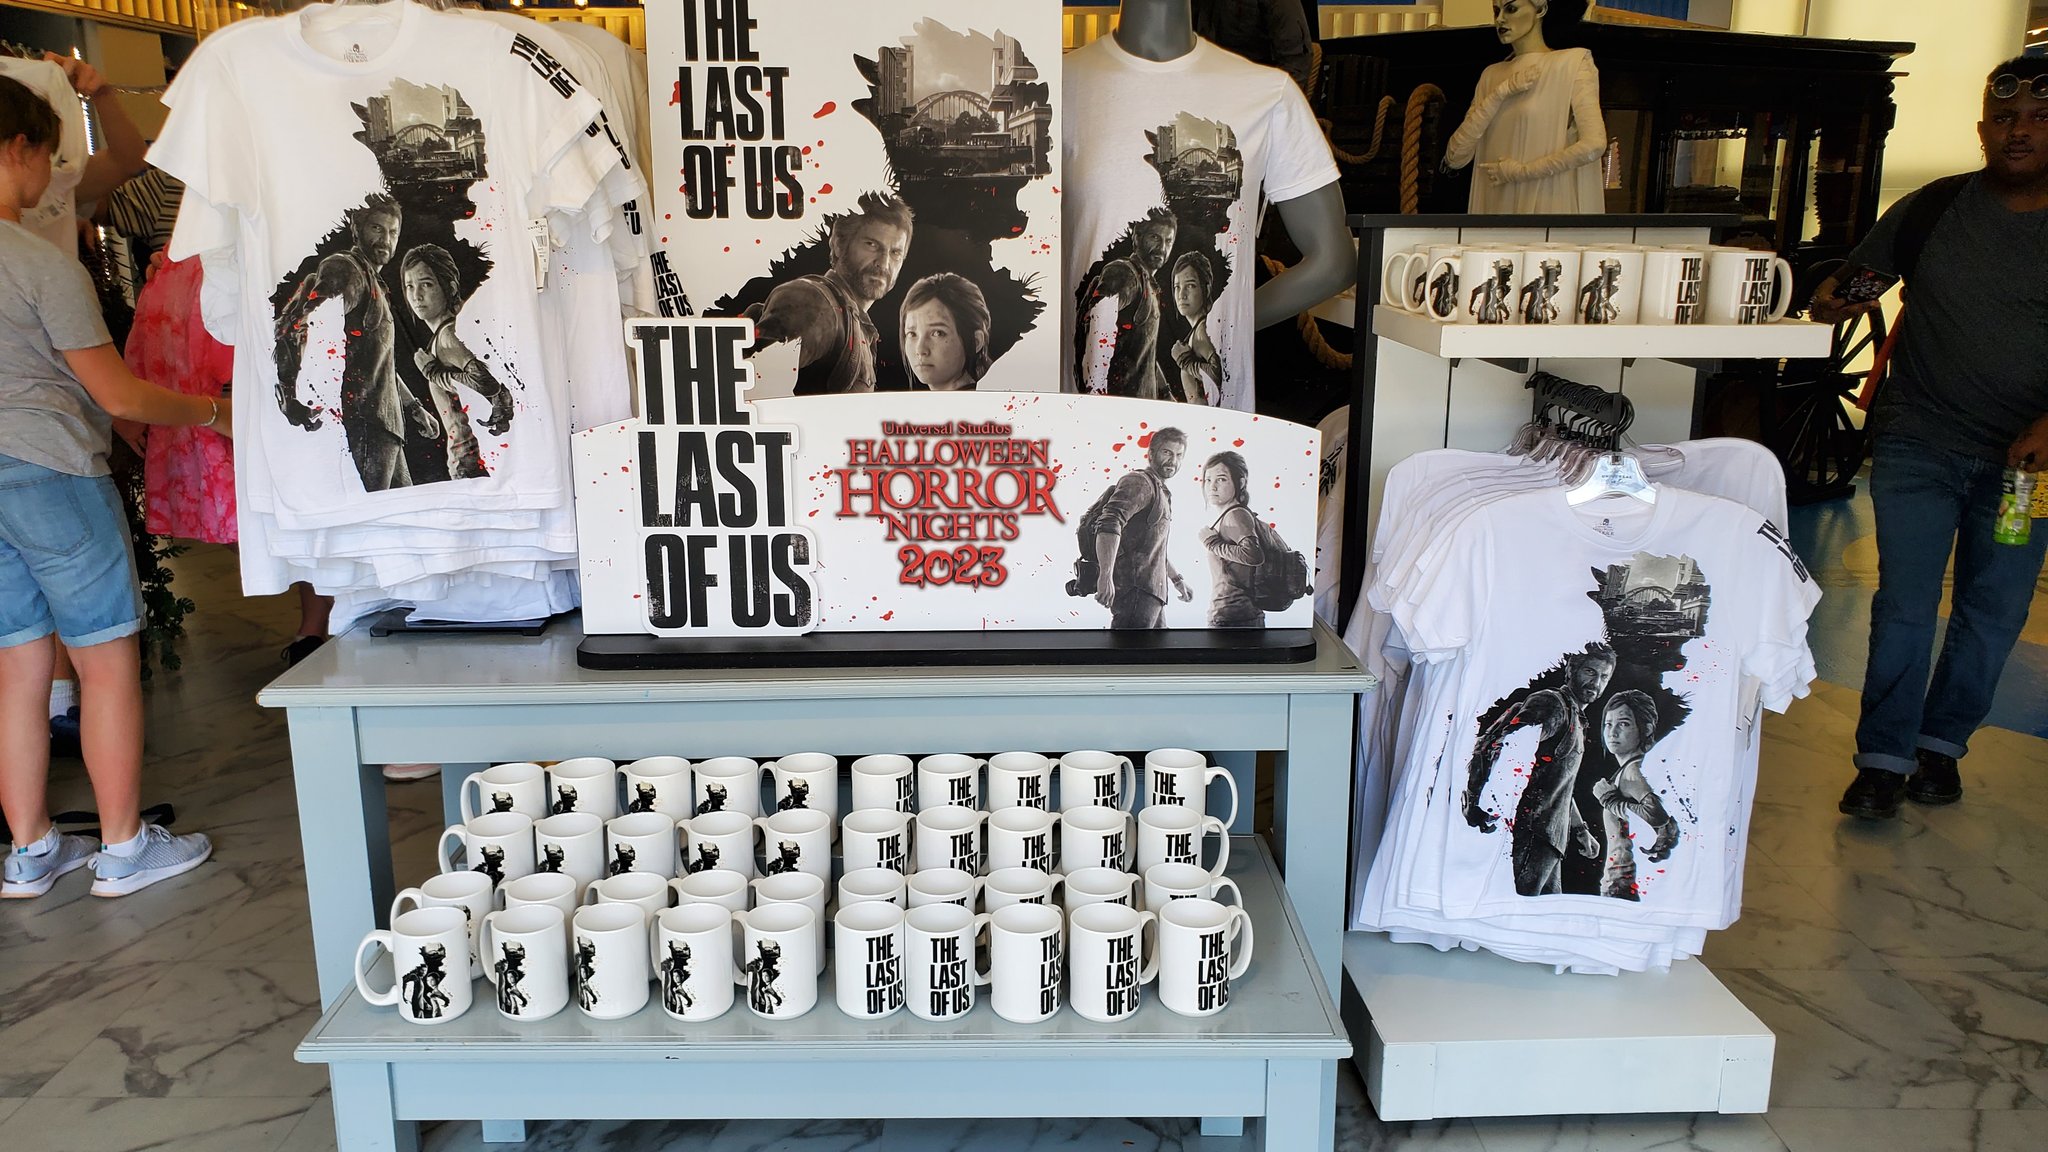 Ashley Carter on X: 'The Last of Us' Halloween Horror Nights merchandise  has arrived at Universal Studios Florida. The merchandise is available at  the Five & Dime shop. #HHN32  / X